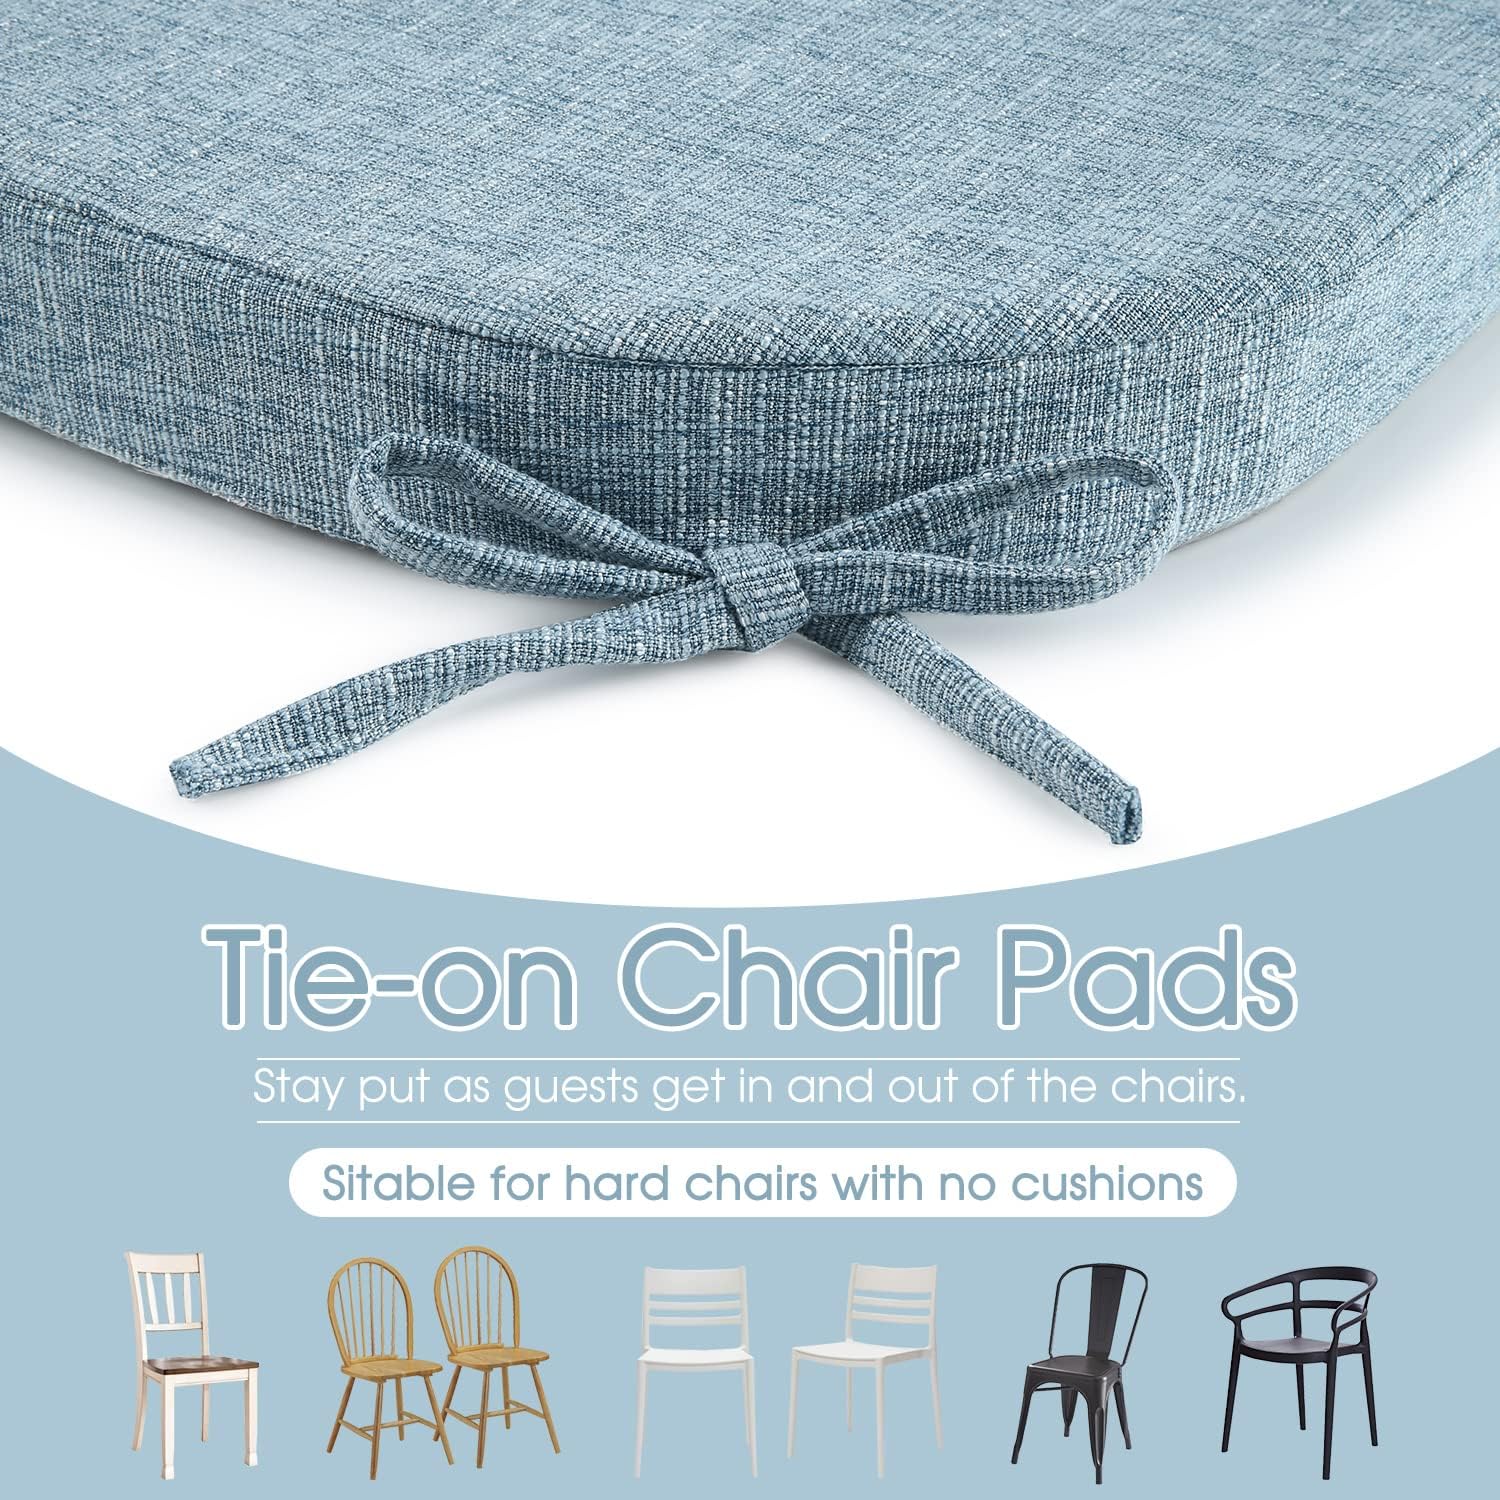 Basic Beyond Chair Cushions for Dining Chairs 4 Pack, Memory Foam Chair Cushion with Ties and Non Slip Backing, 16 x 16 inches Chair Pads fo